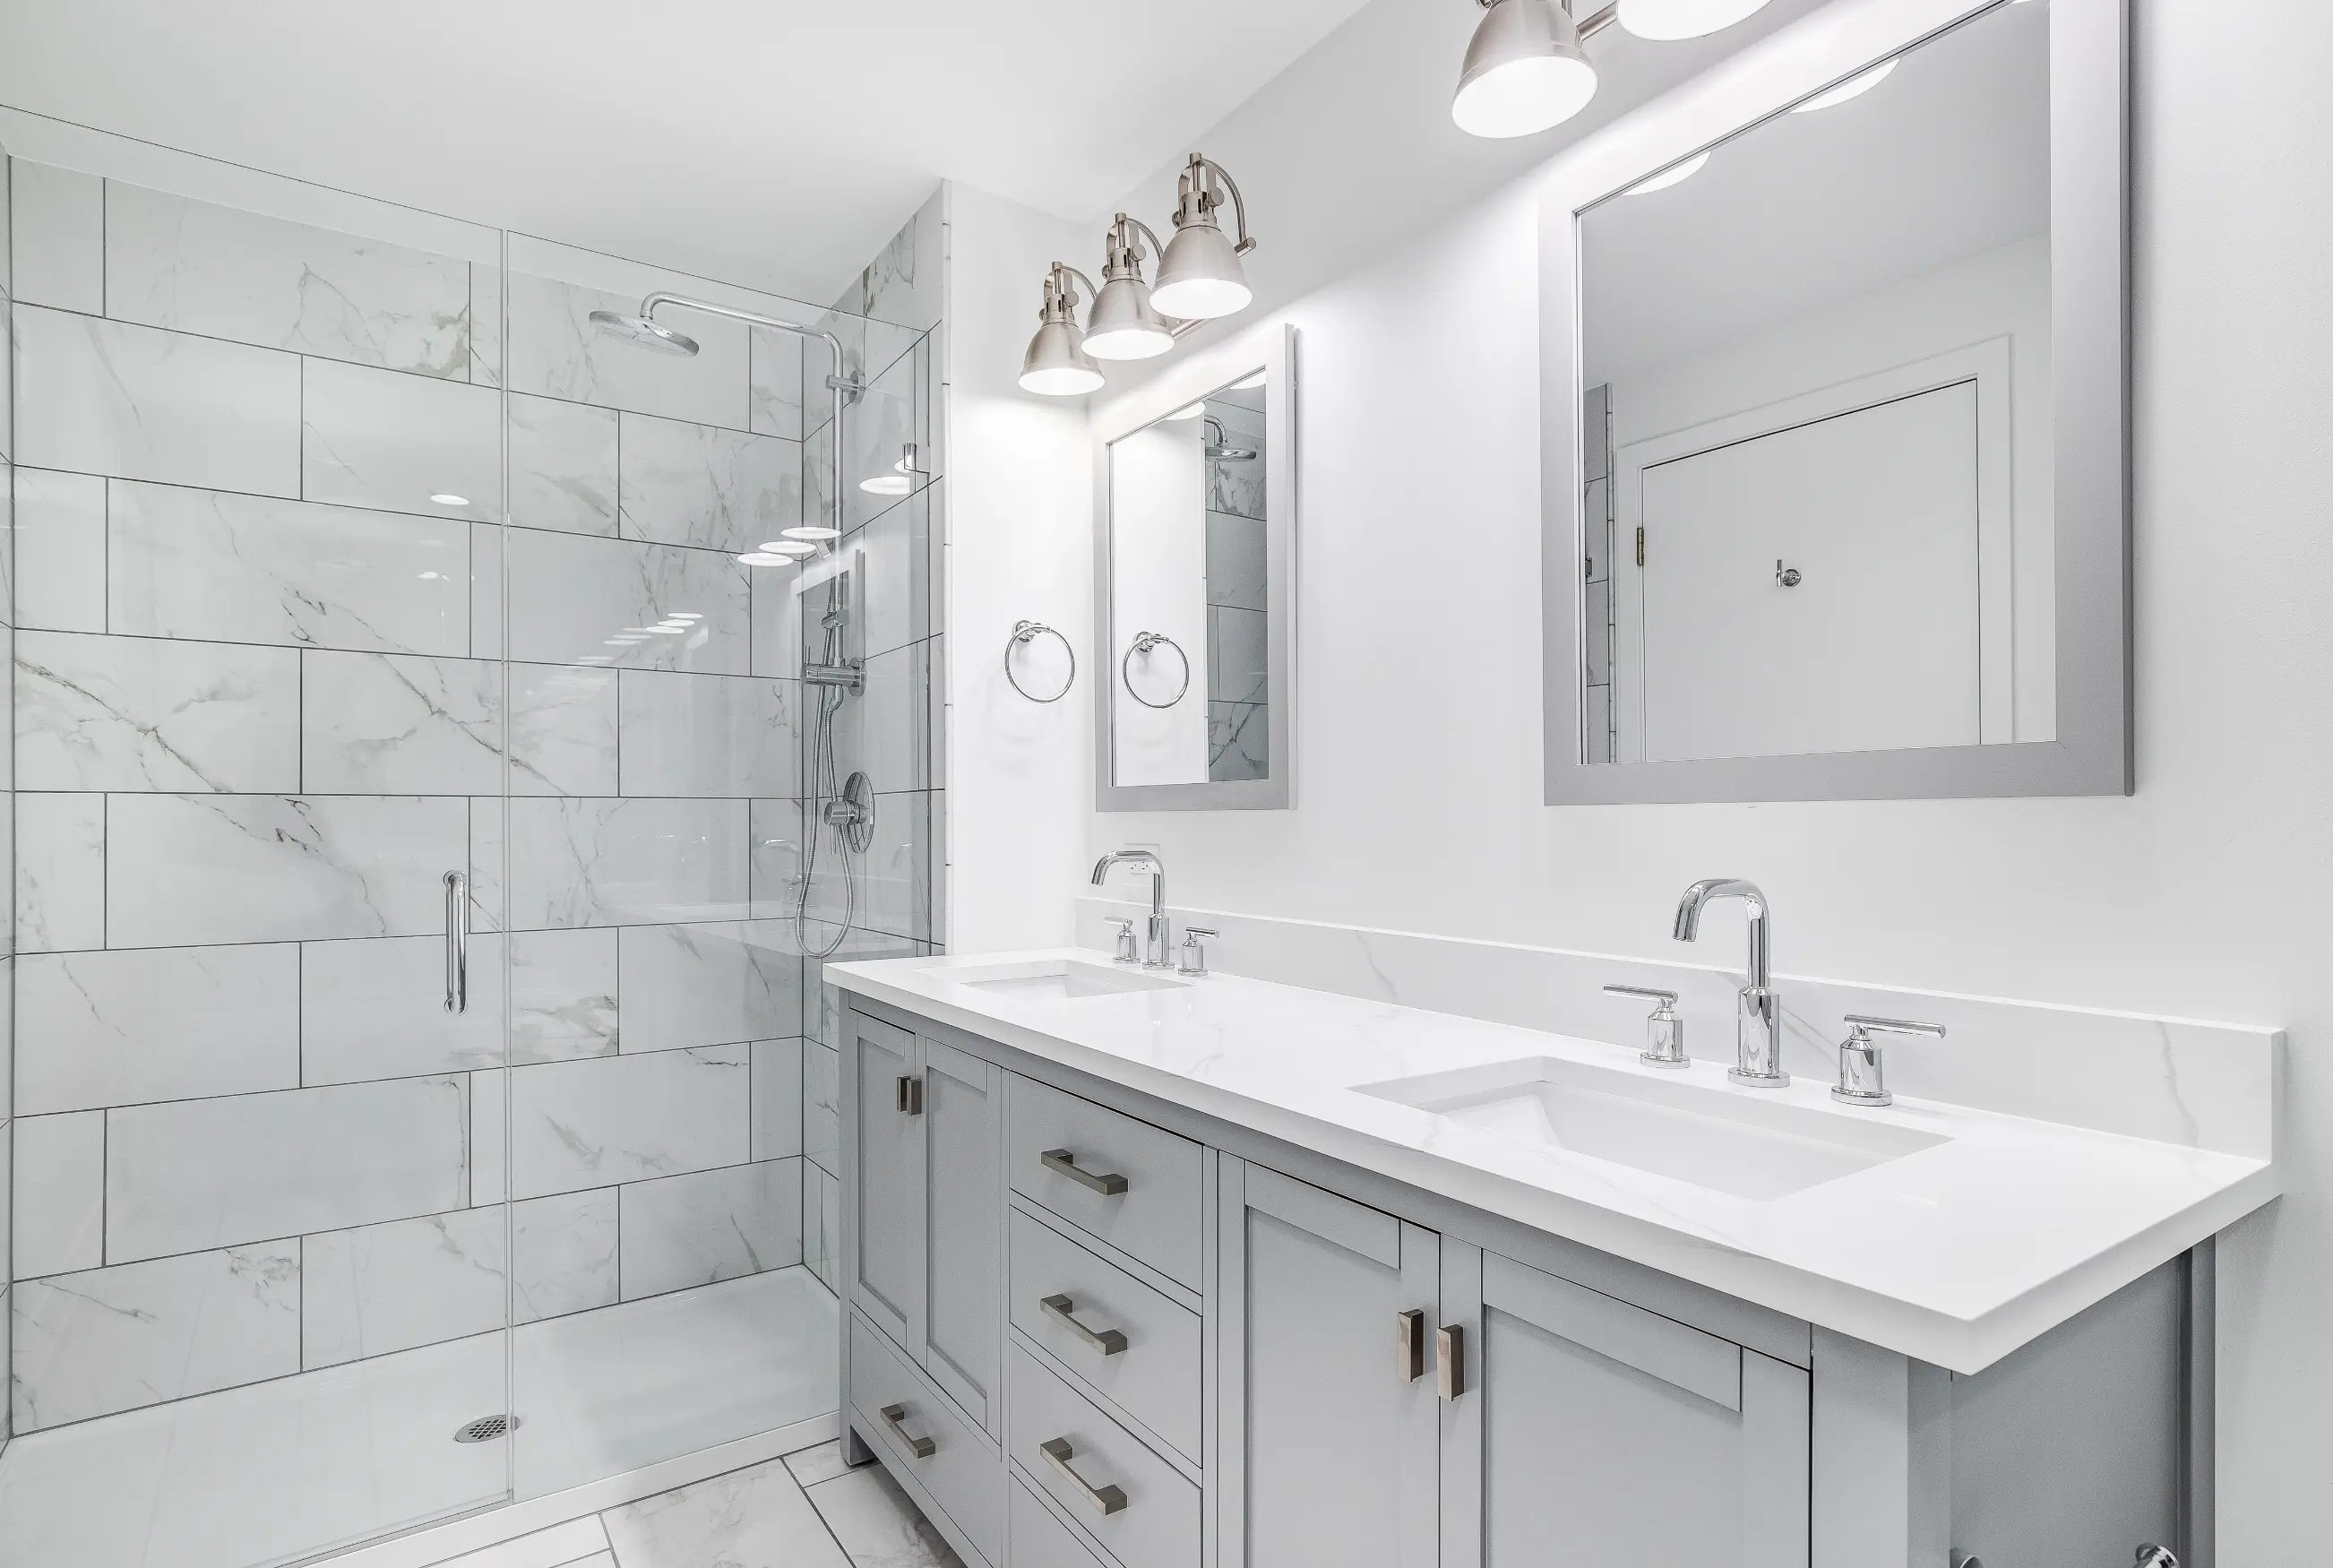 Modern bathroom remodel in Philadelphia featuring a double vanity with mirrors, glass-enclosed shower, and elegant tile work.